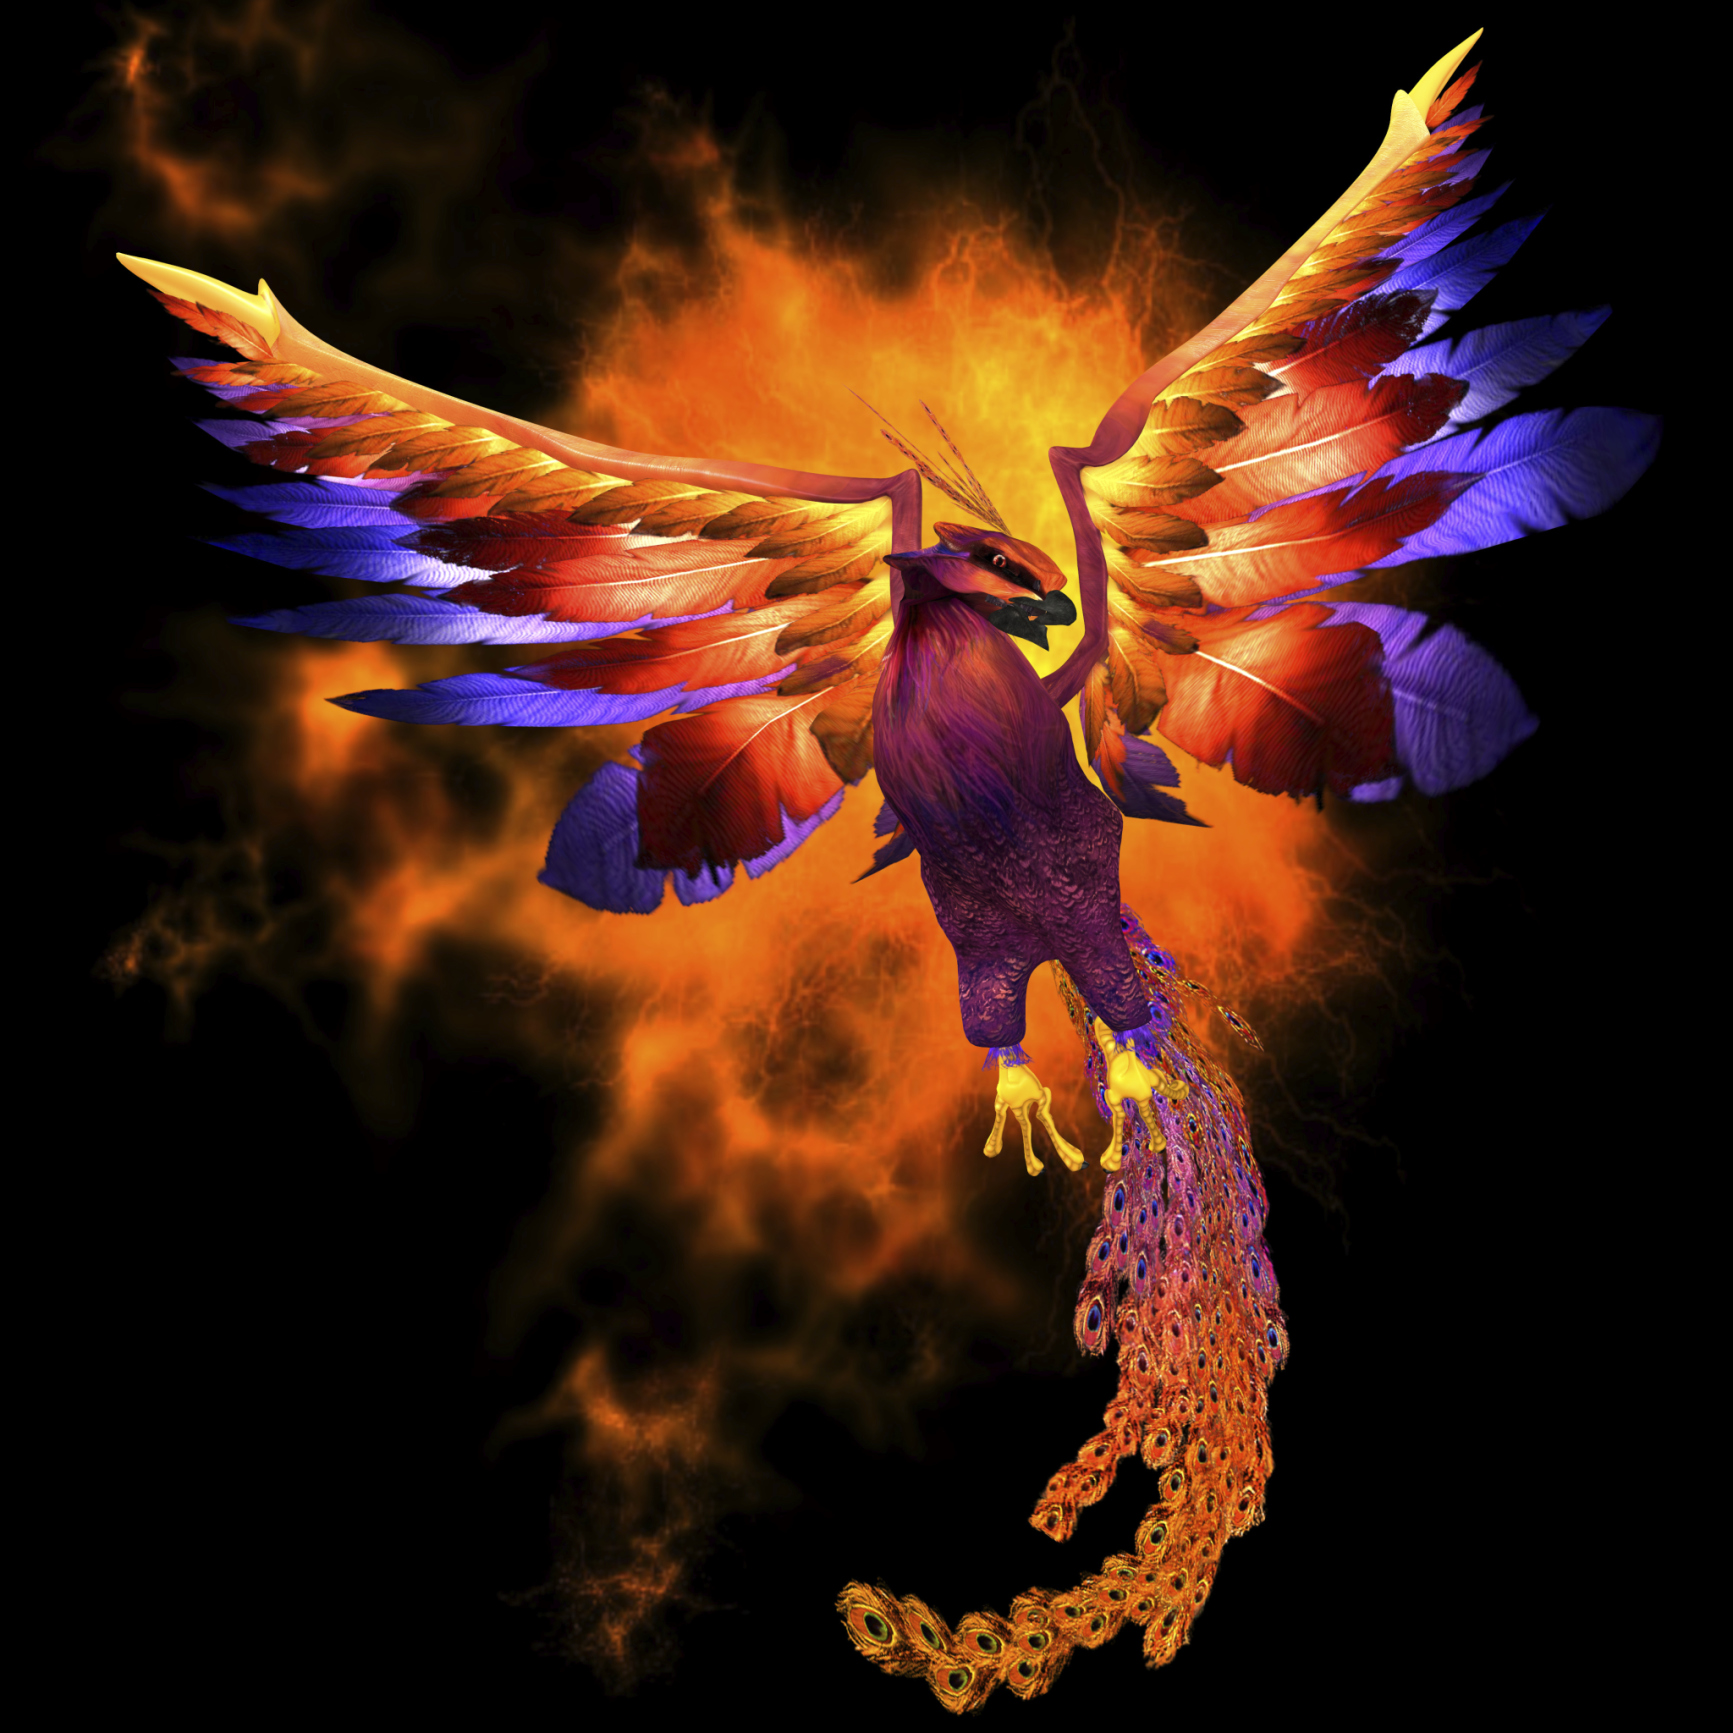 Albums 93+ Wallpaper Picture Of A Phoenix Rising From The Ashes ...